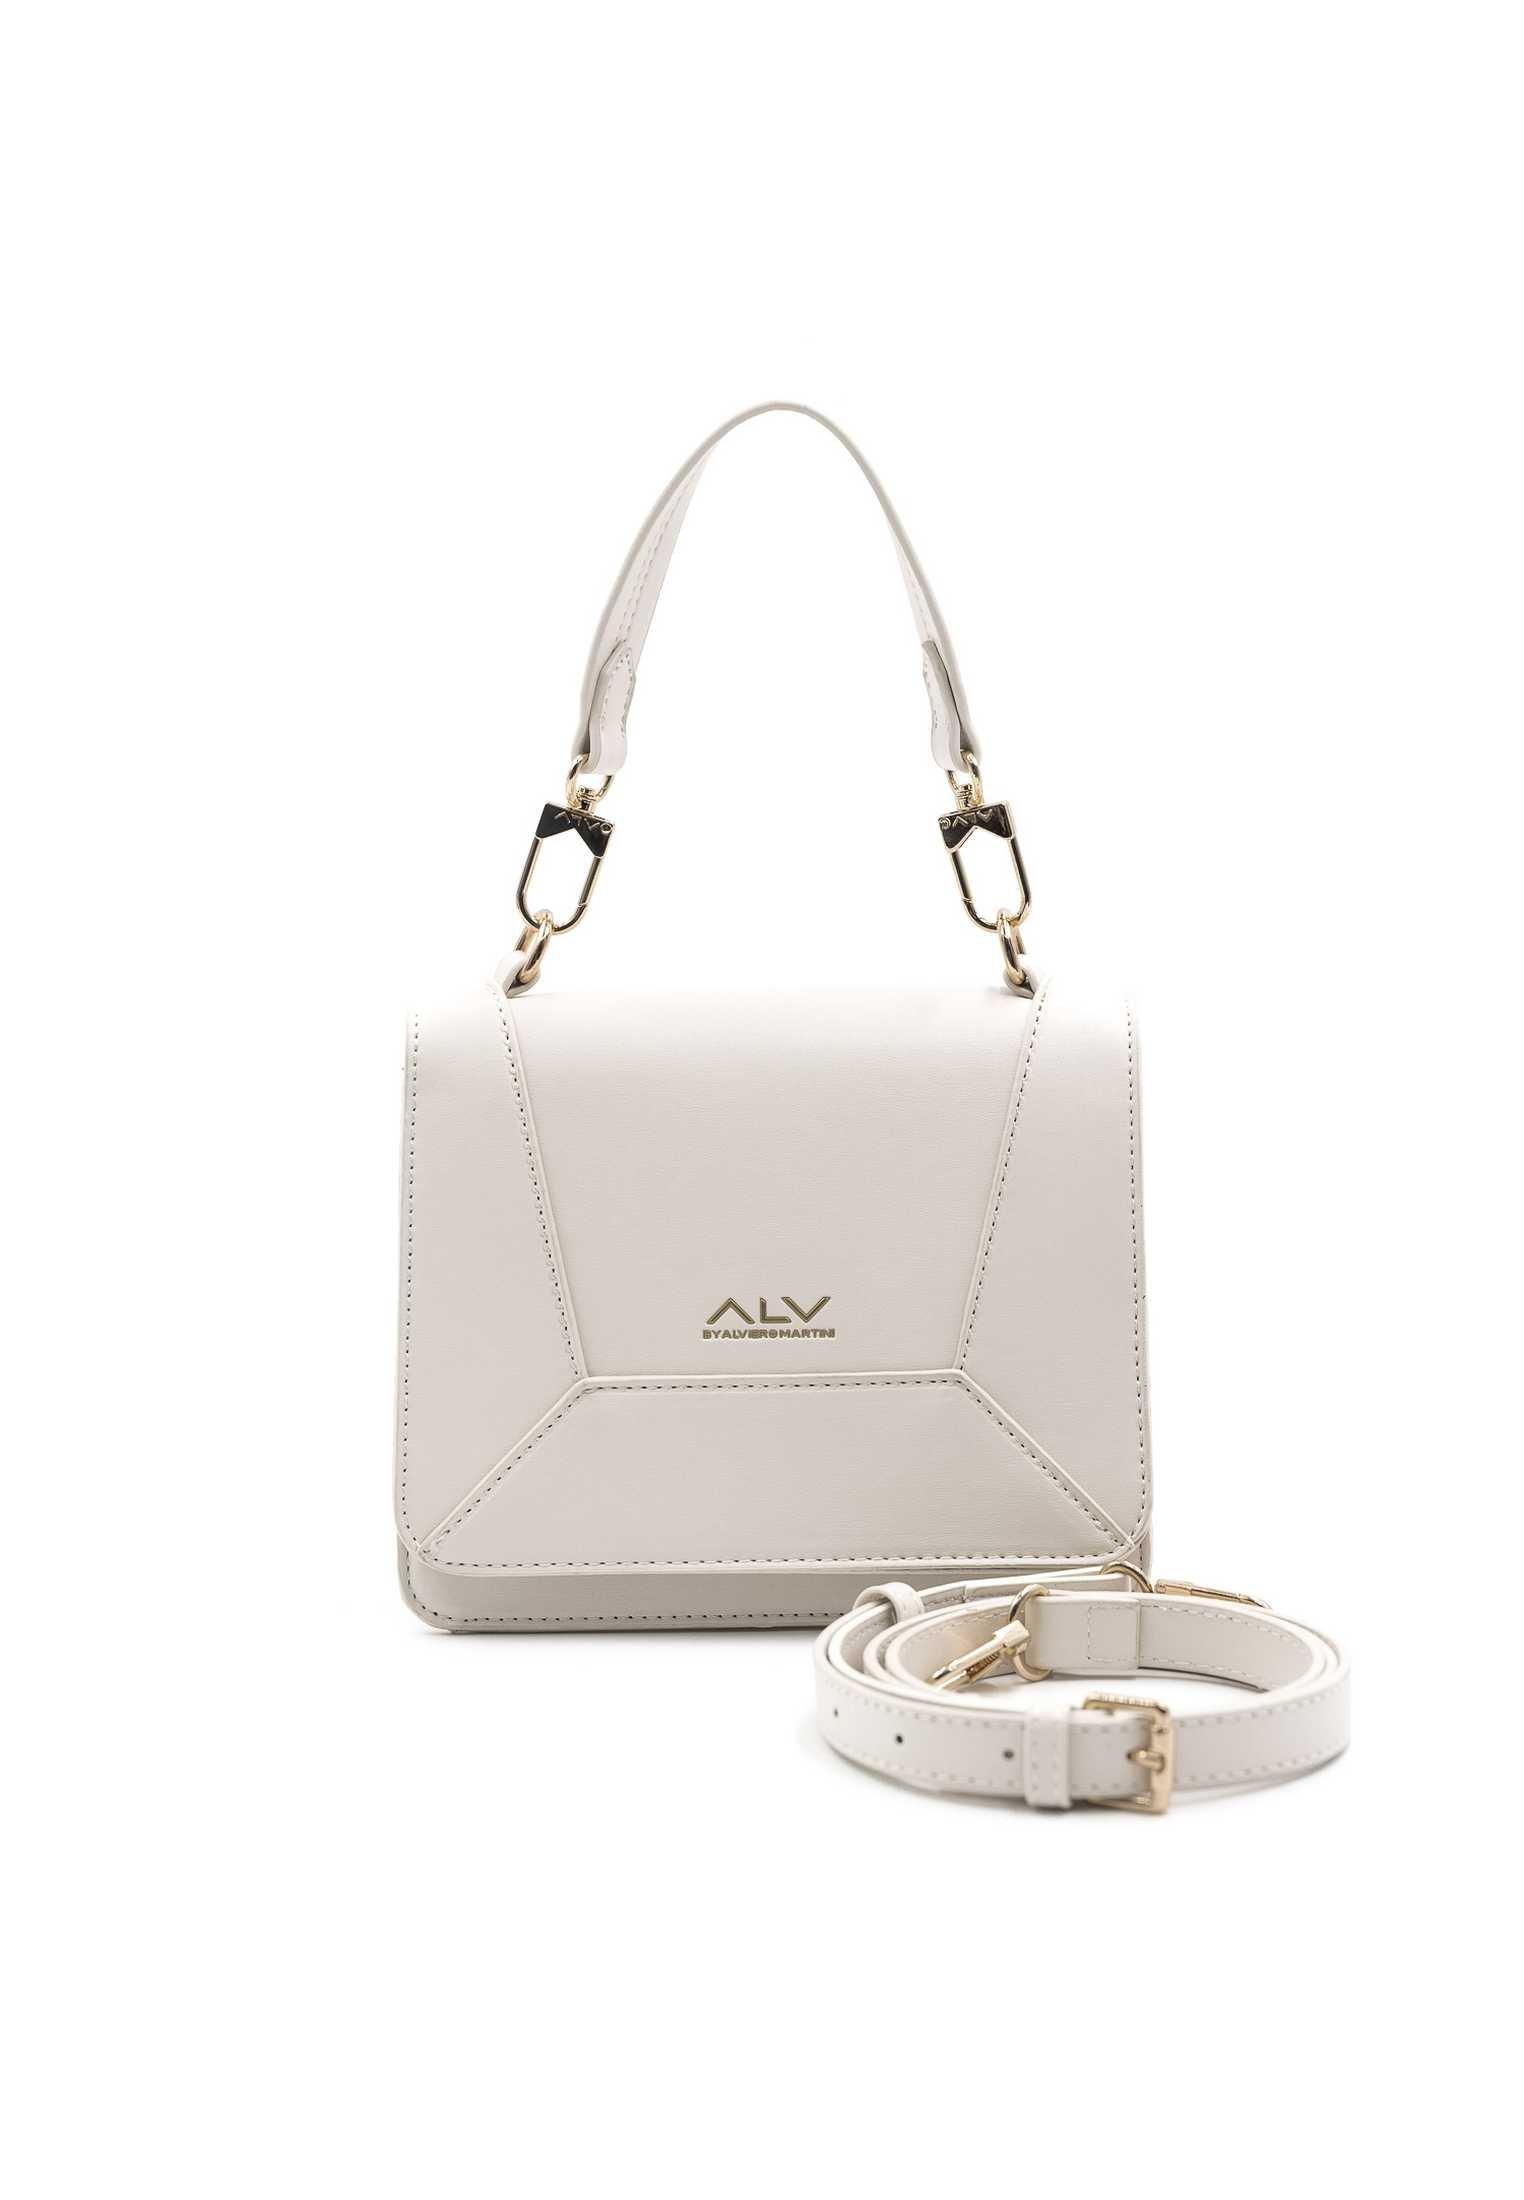 Image of ALV by Alviero Martini Shoulder Bag With Flap Virgo Collection Audrey Alv By Alviero Martini Handtasche - ONE SIZE